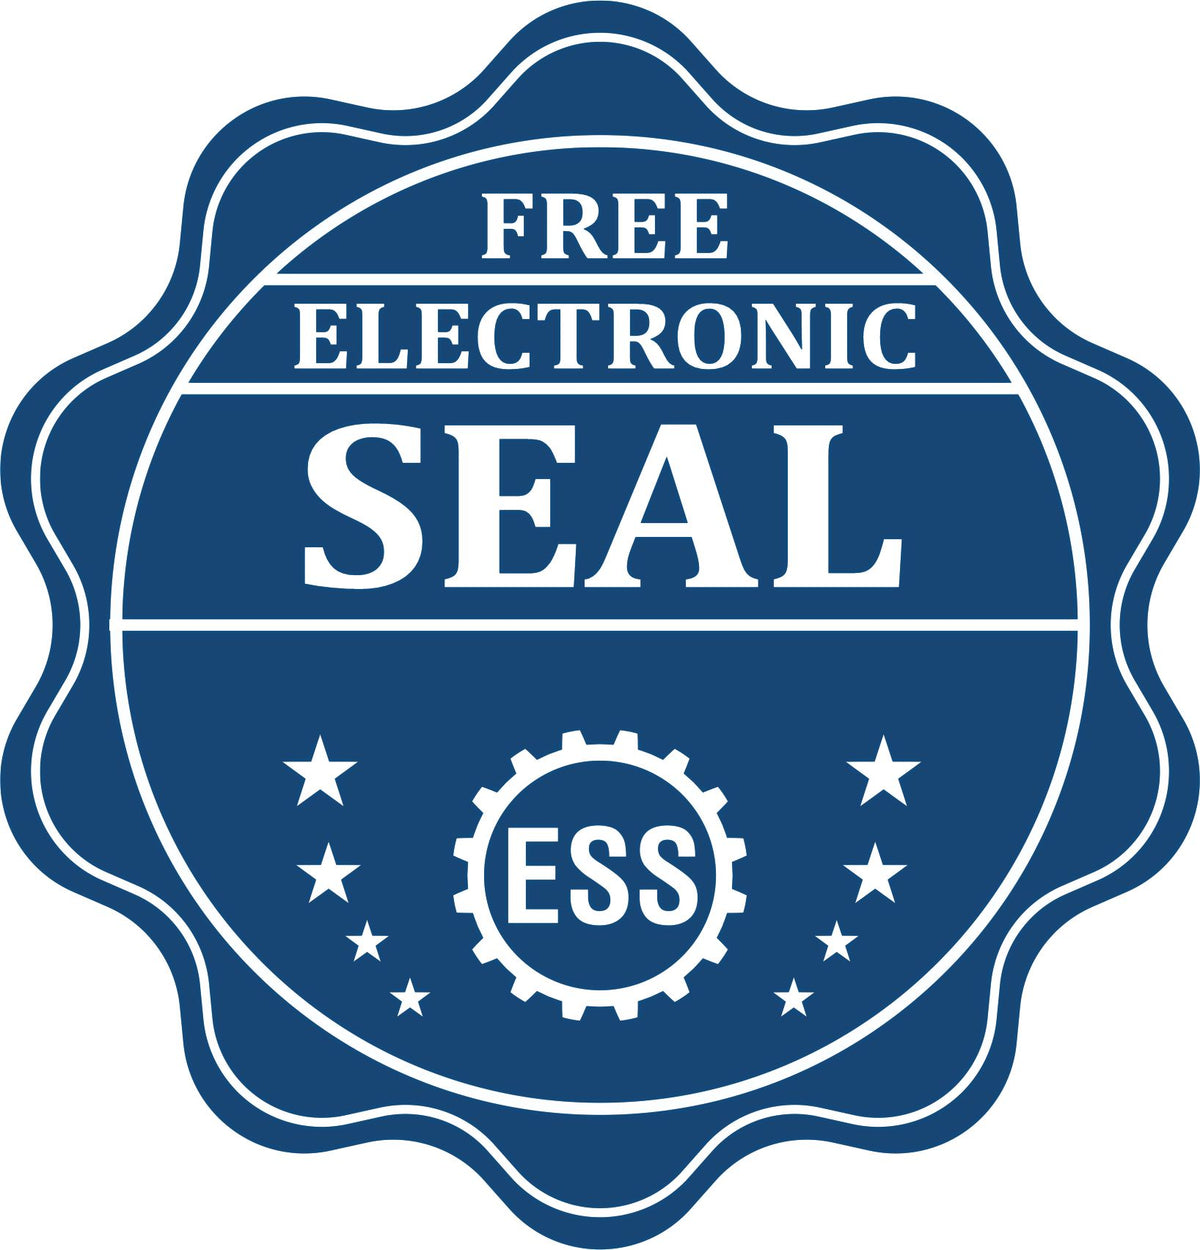 A badge showing a free electronic seal for the Soft Pocket Georgia Landscape Architect Embosser with stars and the ESS gear on the emblem.